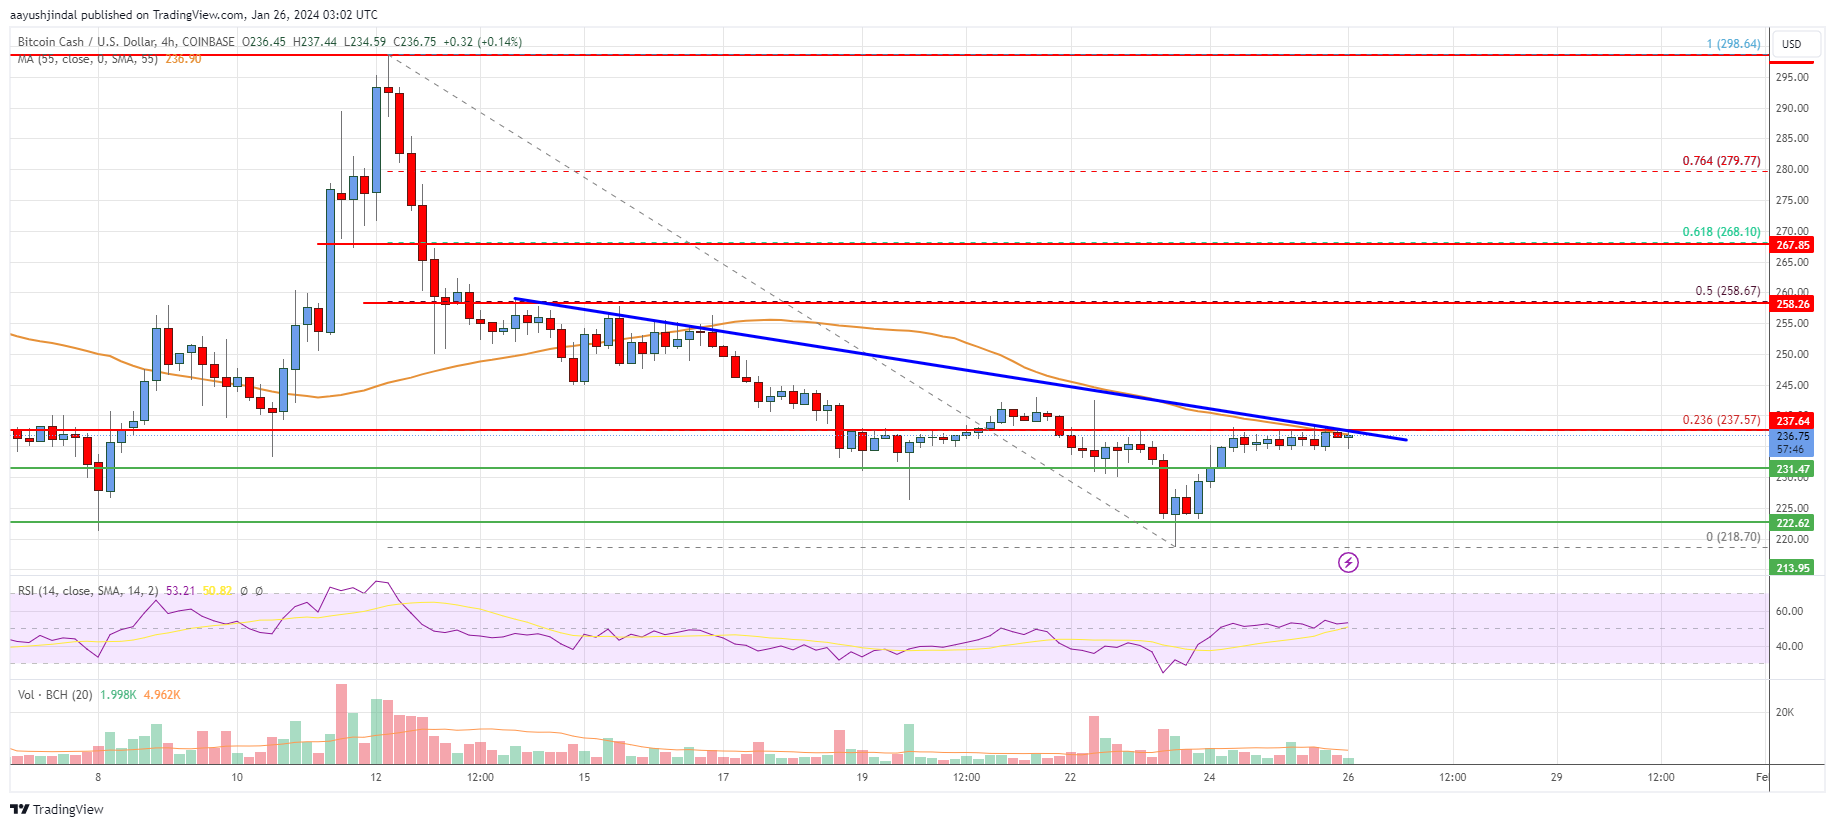 Bitcoin Cash (BCH) Technical Analysis Daily, Bitcoin Cash Price Forecast and Reports